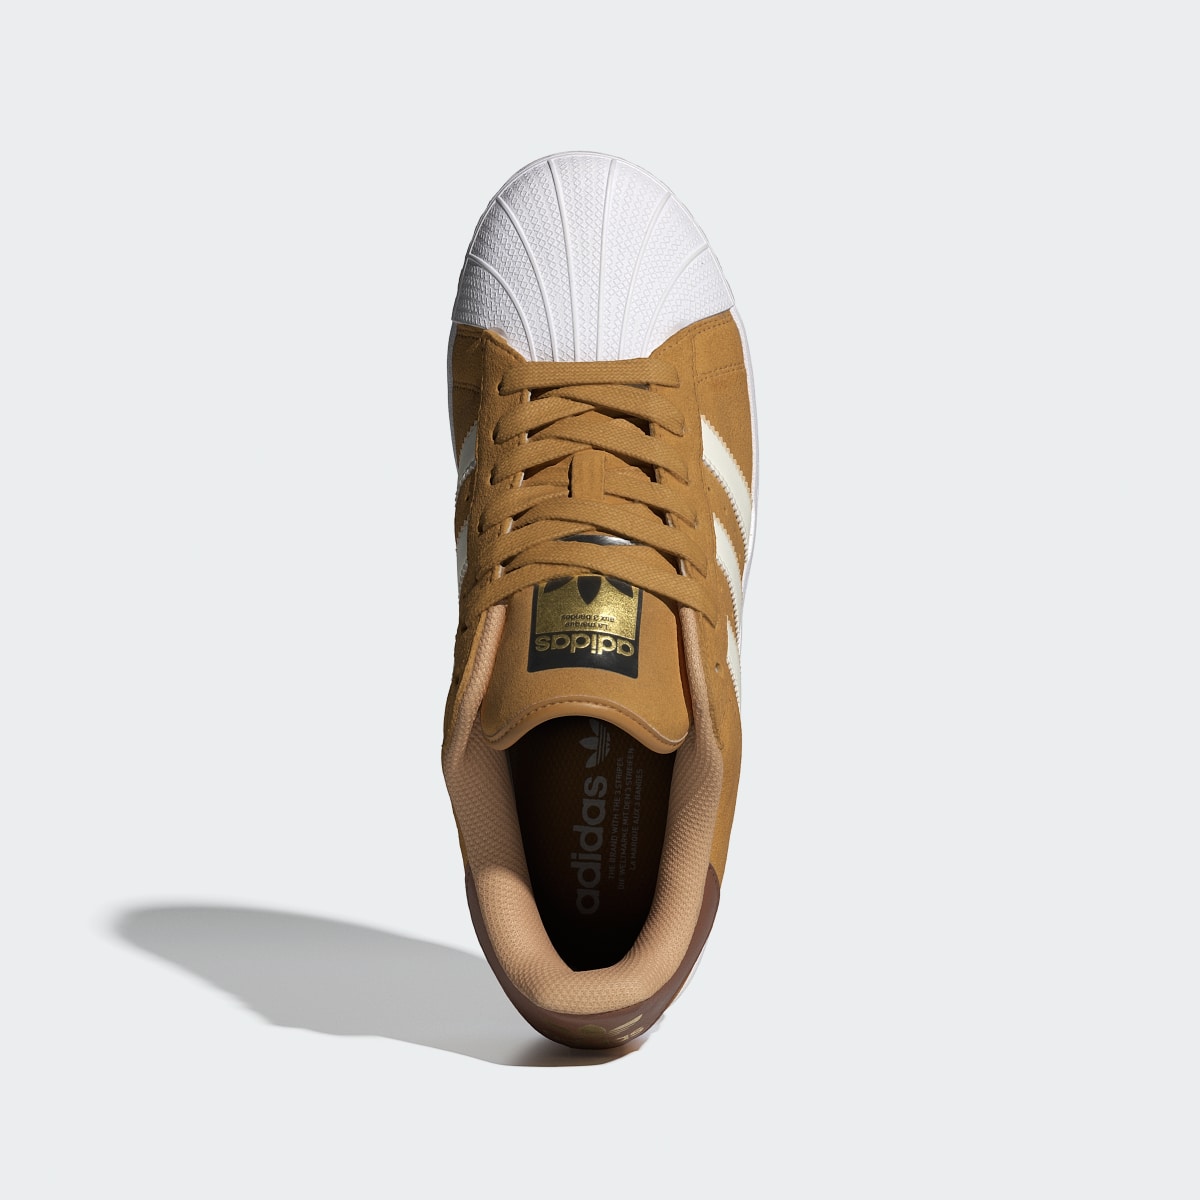 Adidas Superstar XLG Shoes. 3